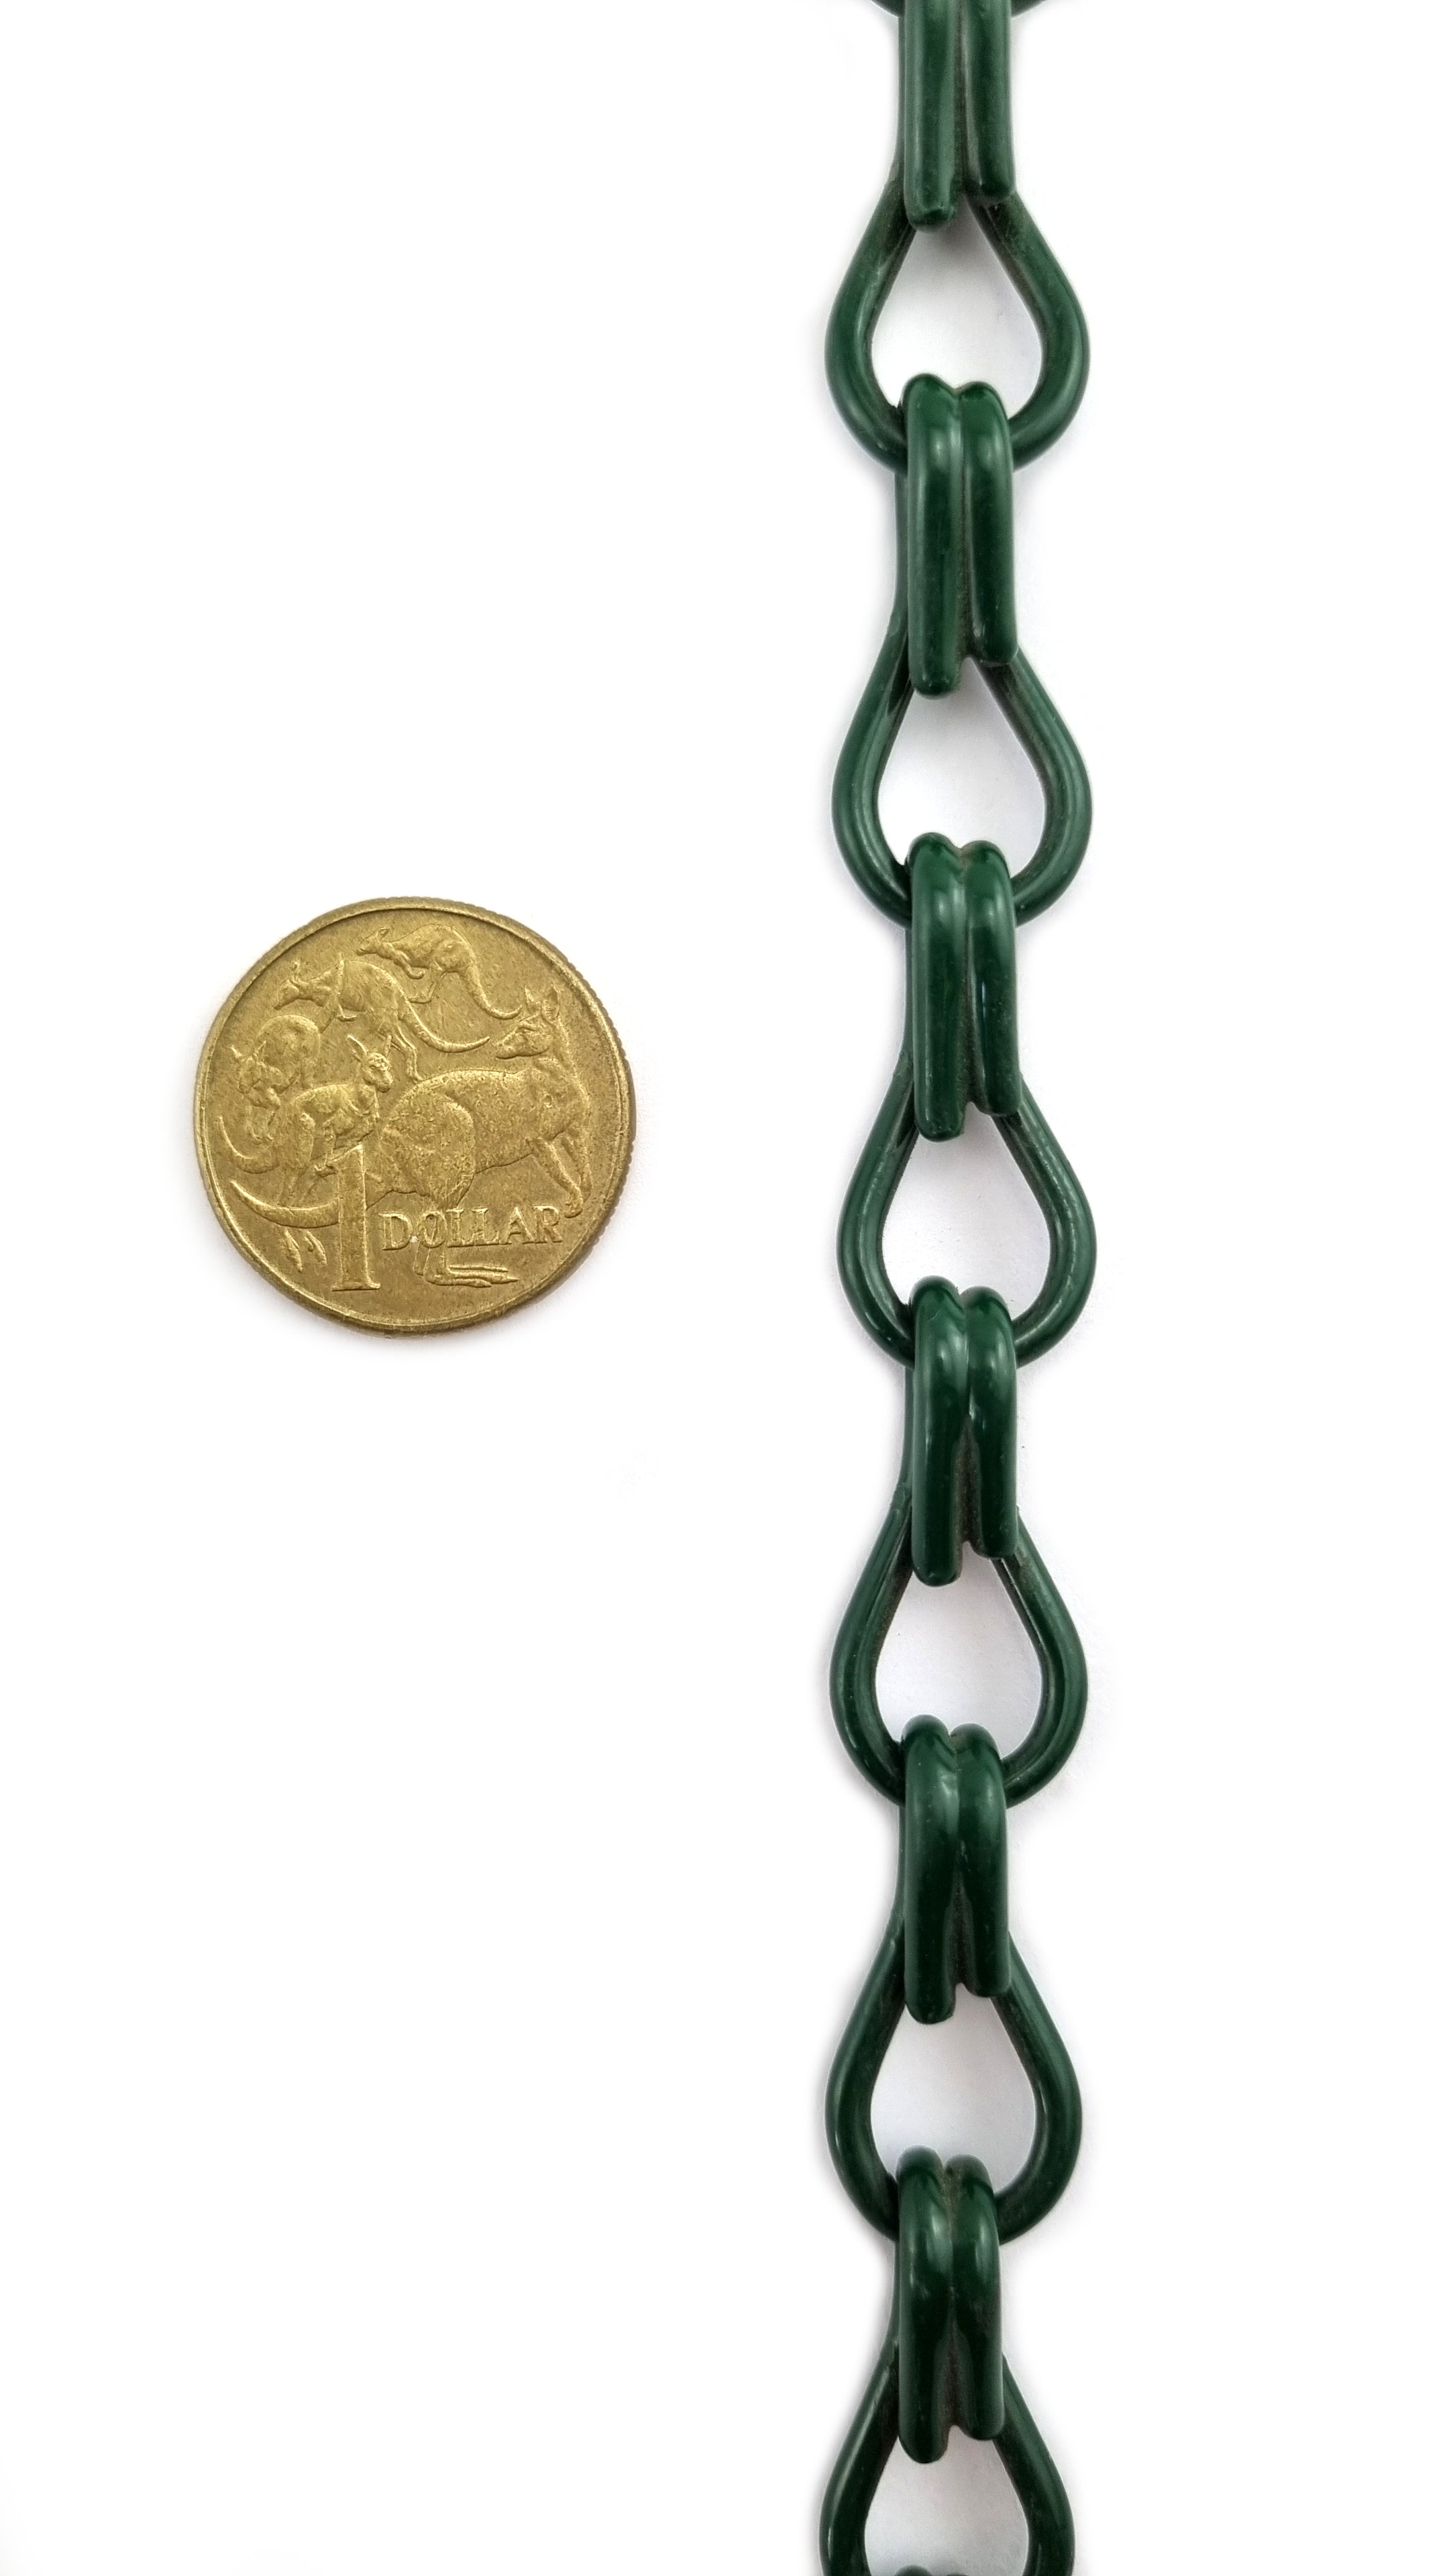 2.5mm Double Jack Chain Green Powder Coated. Australian made. Qty 30m or by the metre. Shop hardware online chain.com.au